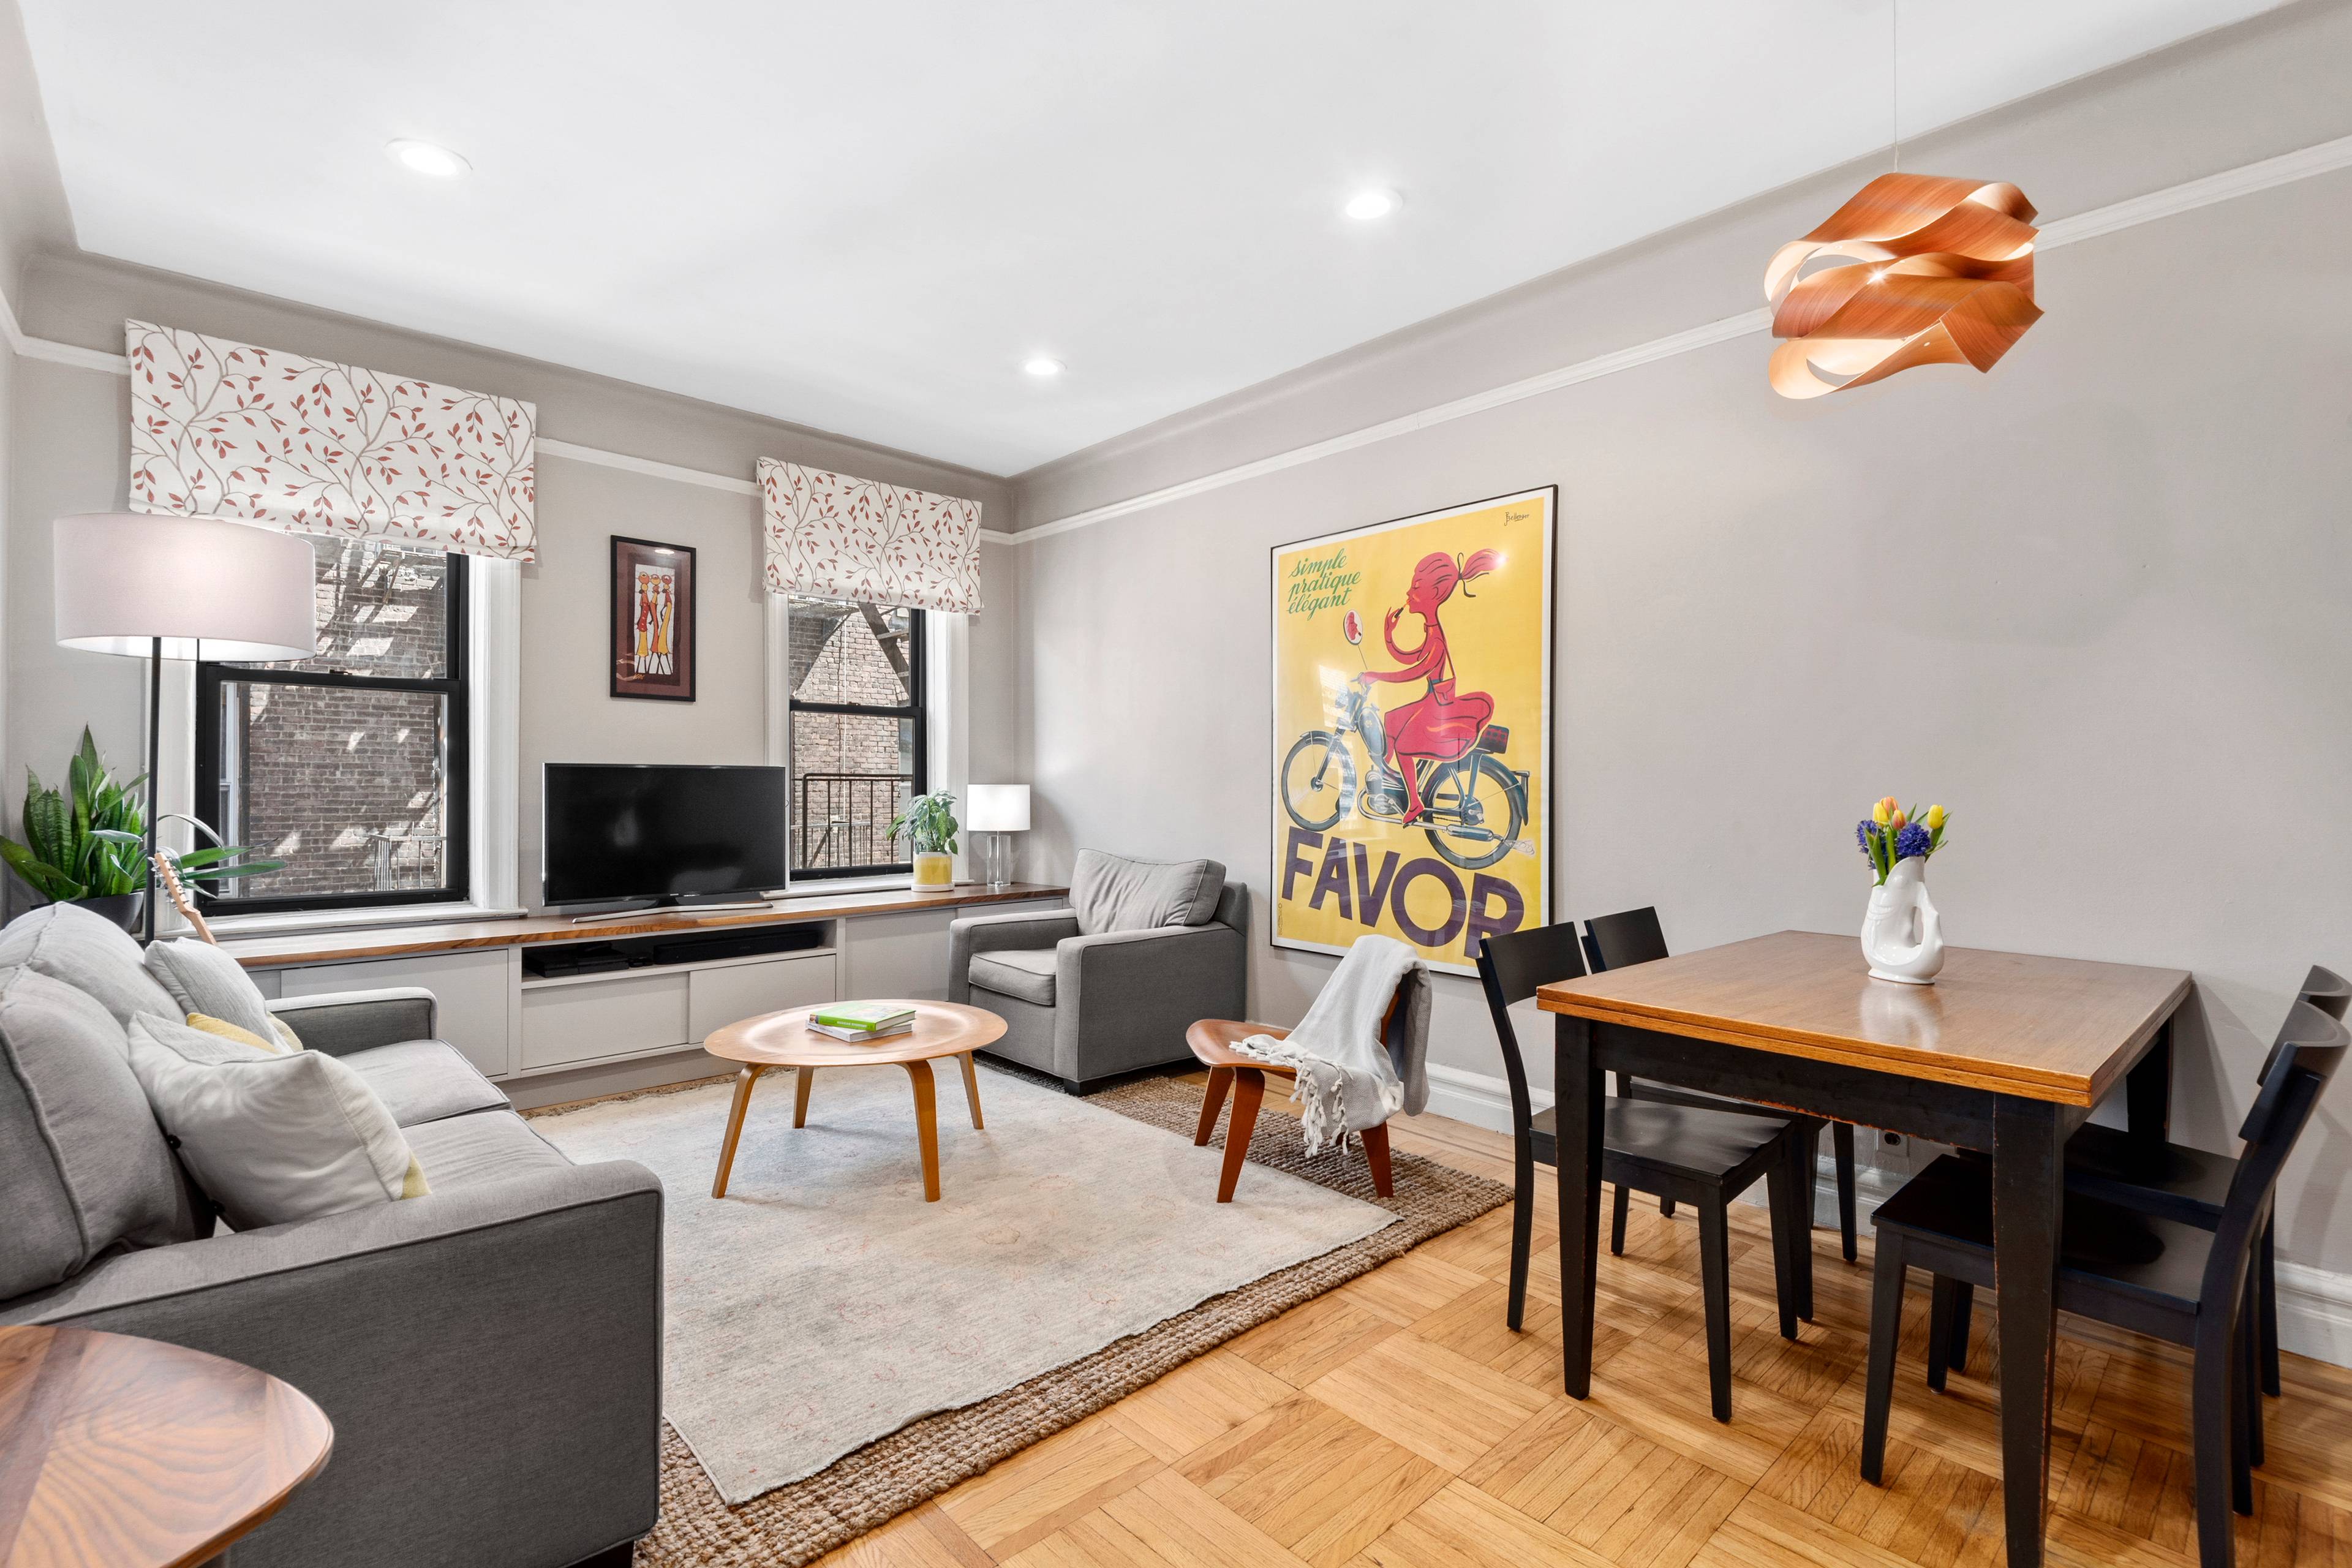 This bright two bedroom, one bathroom co op delivers lovely updates and quintessential Brooklyn living in desirable Park Slope.